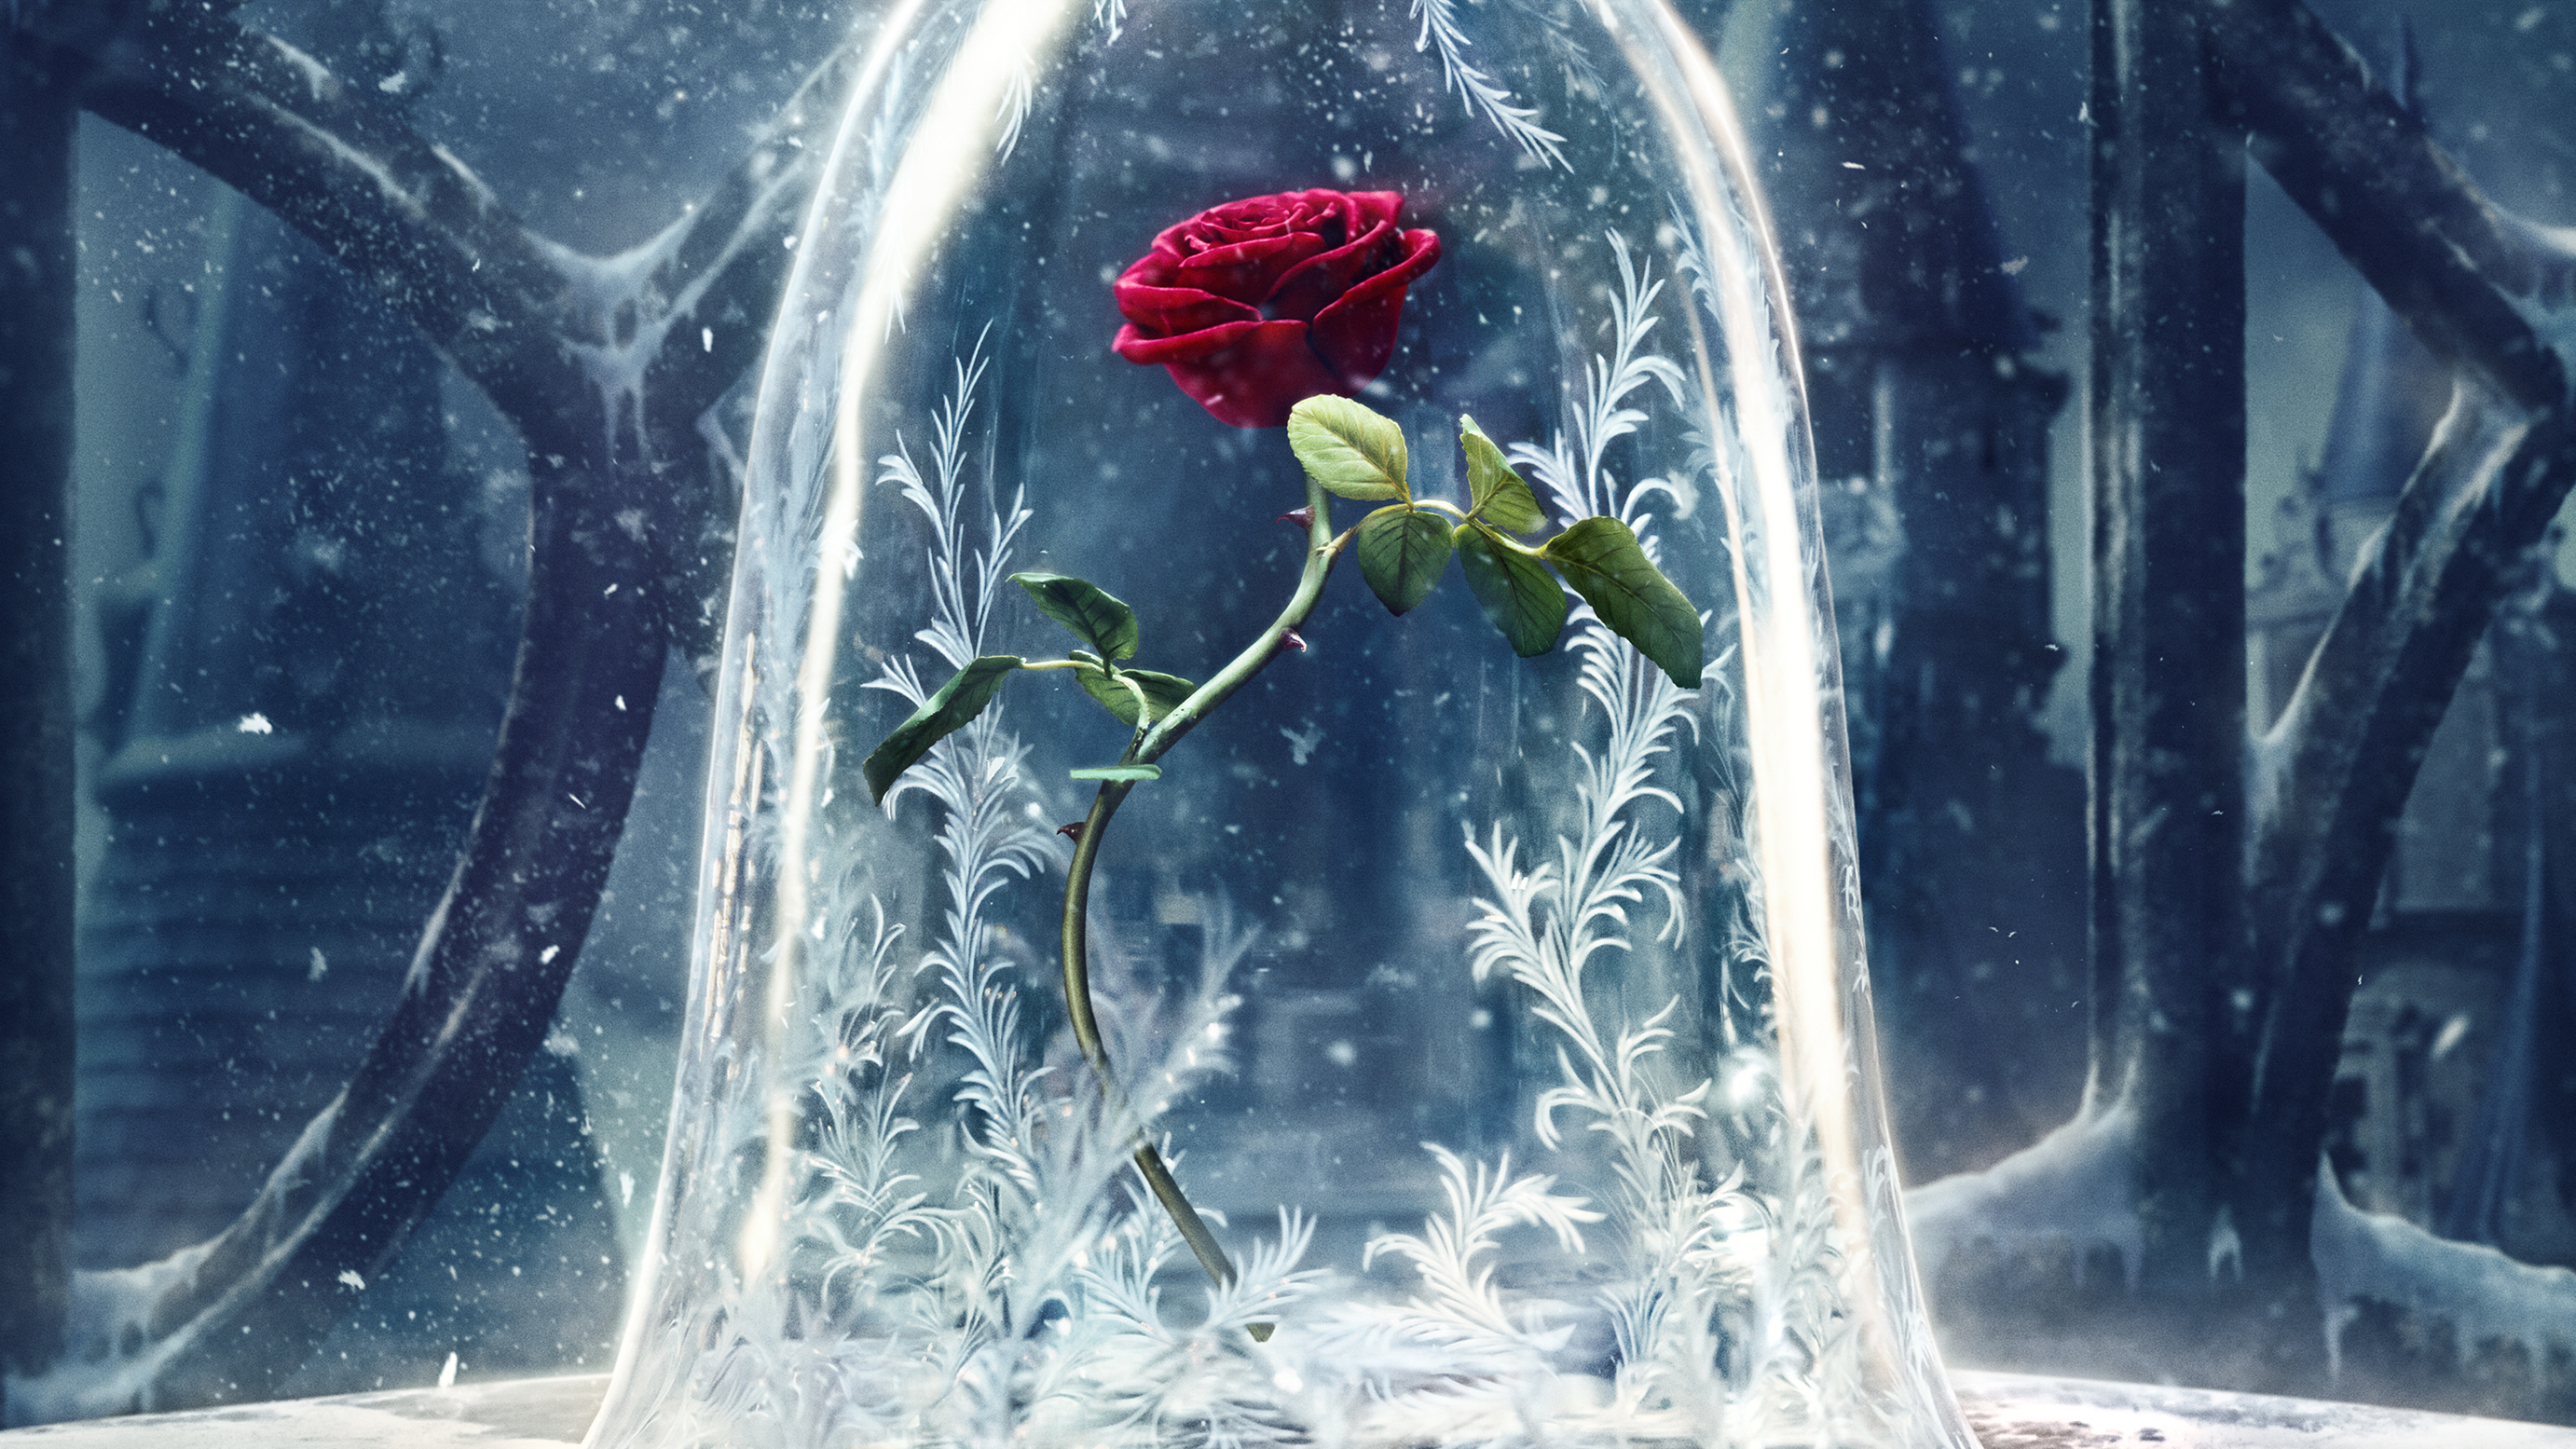 Wallpapers Beauty and the Beast, 2017 Movies, Disney, Rose, Movies,